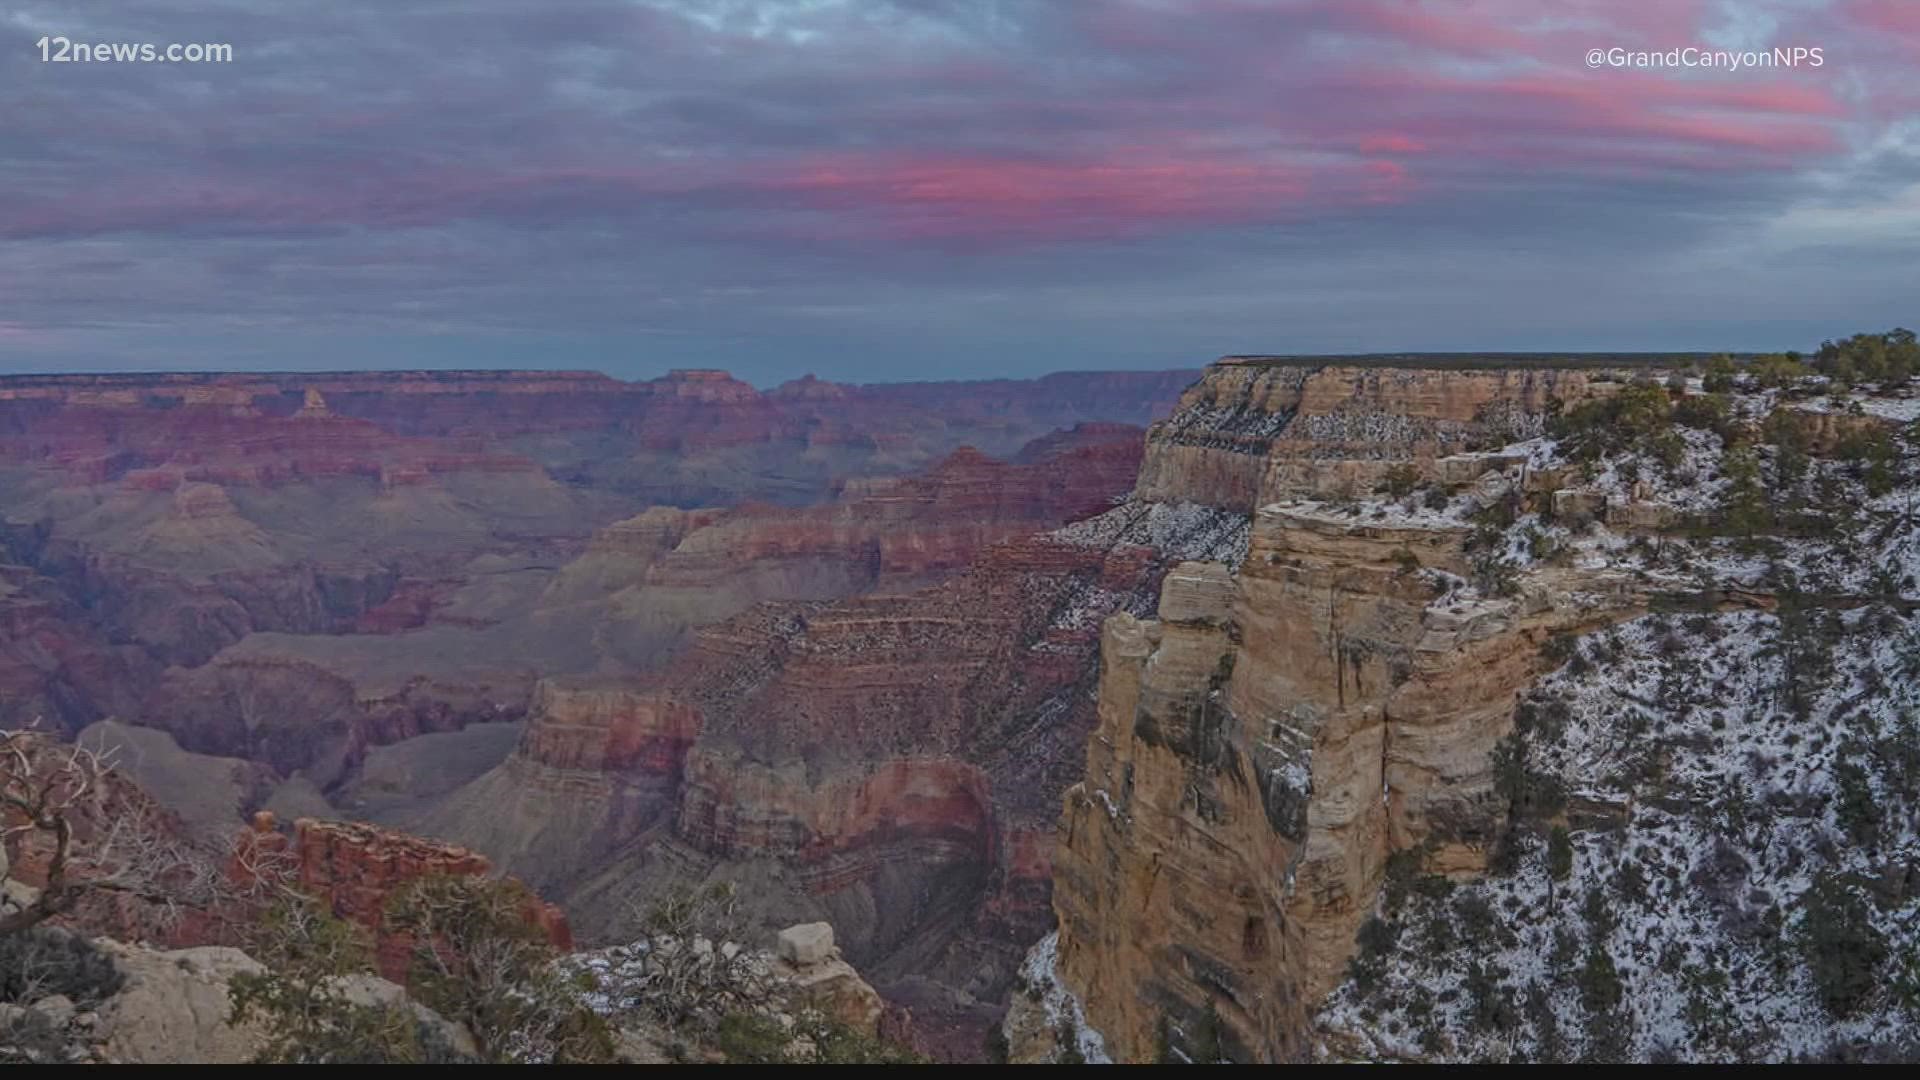 A Grand Canyon hiker was found dead Tuesday morning below the South Rim, authorities said.